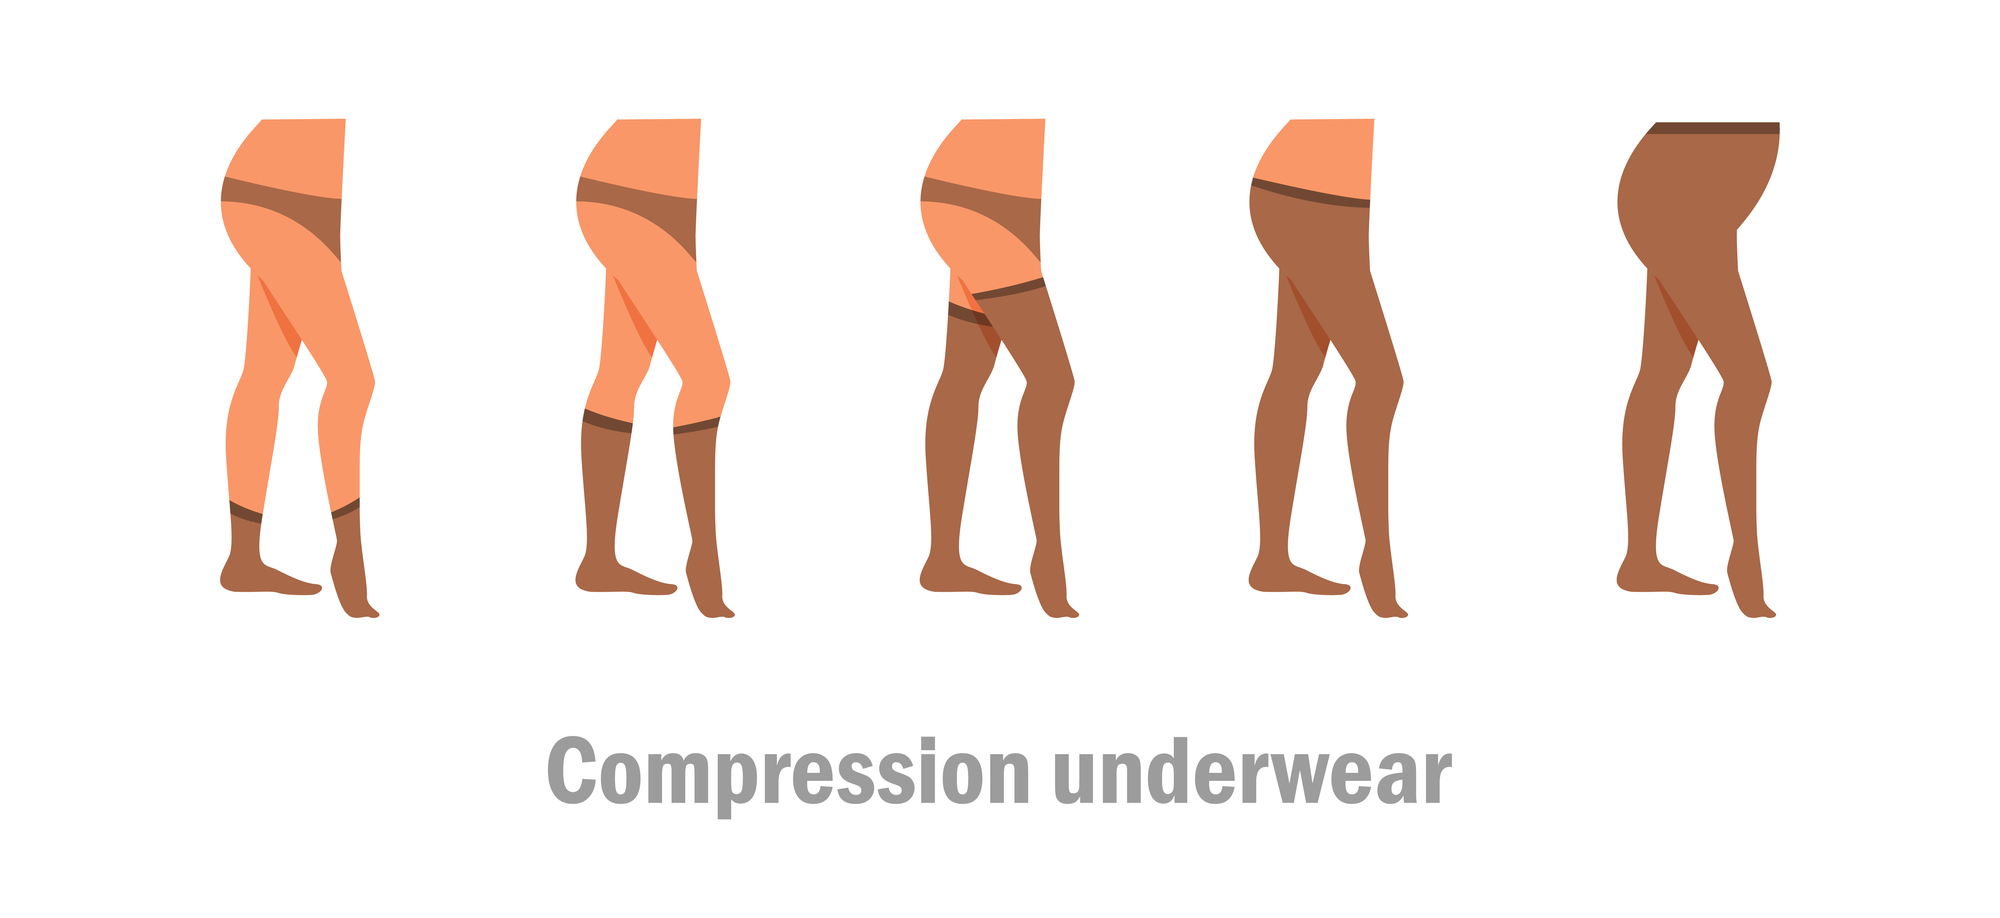 Your Questions Answered: How to Choose Compression Socks for